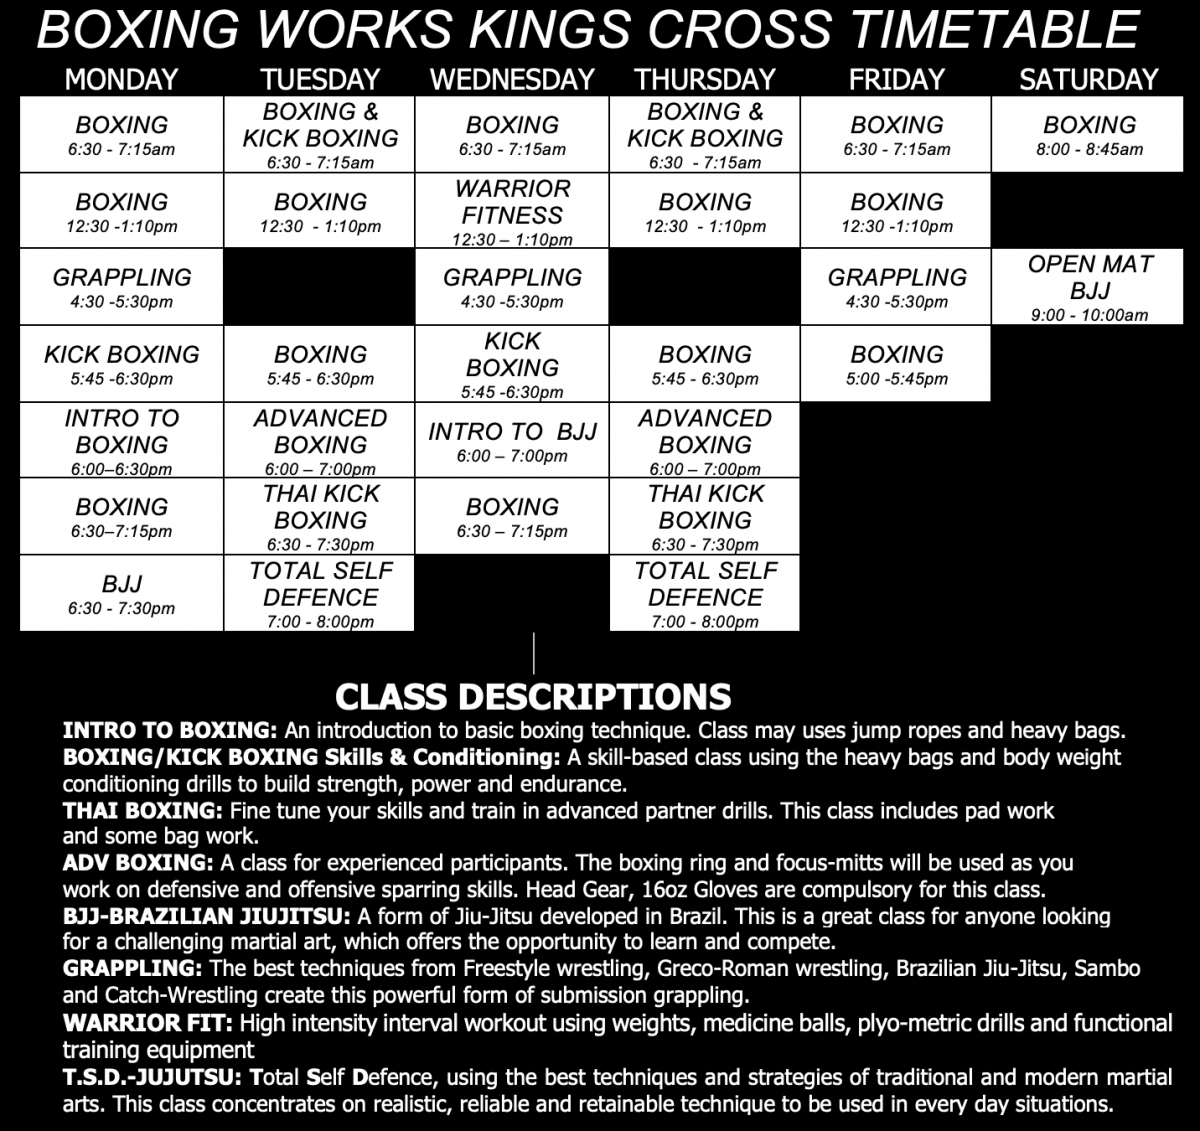 Timetable - Boxing Works